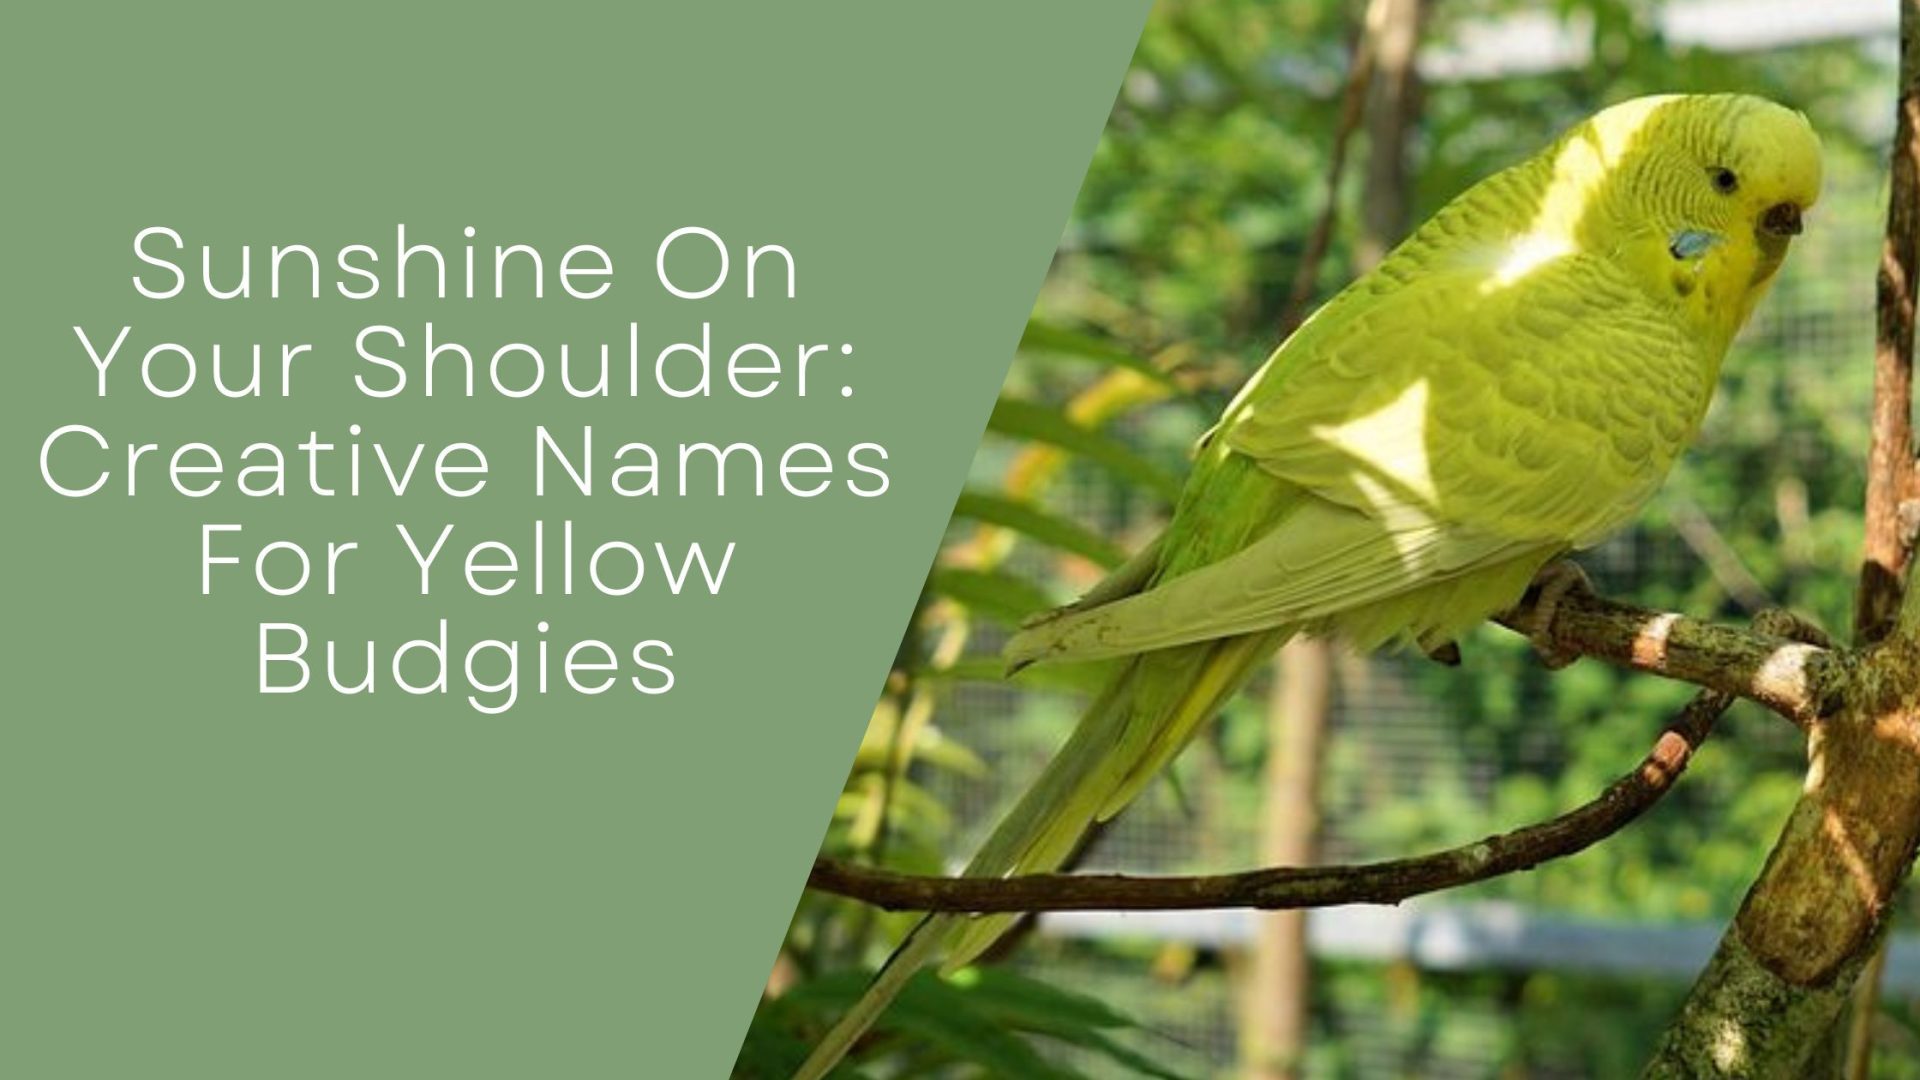 Creative Names For Yellow Budgies